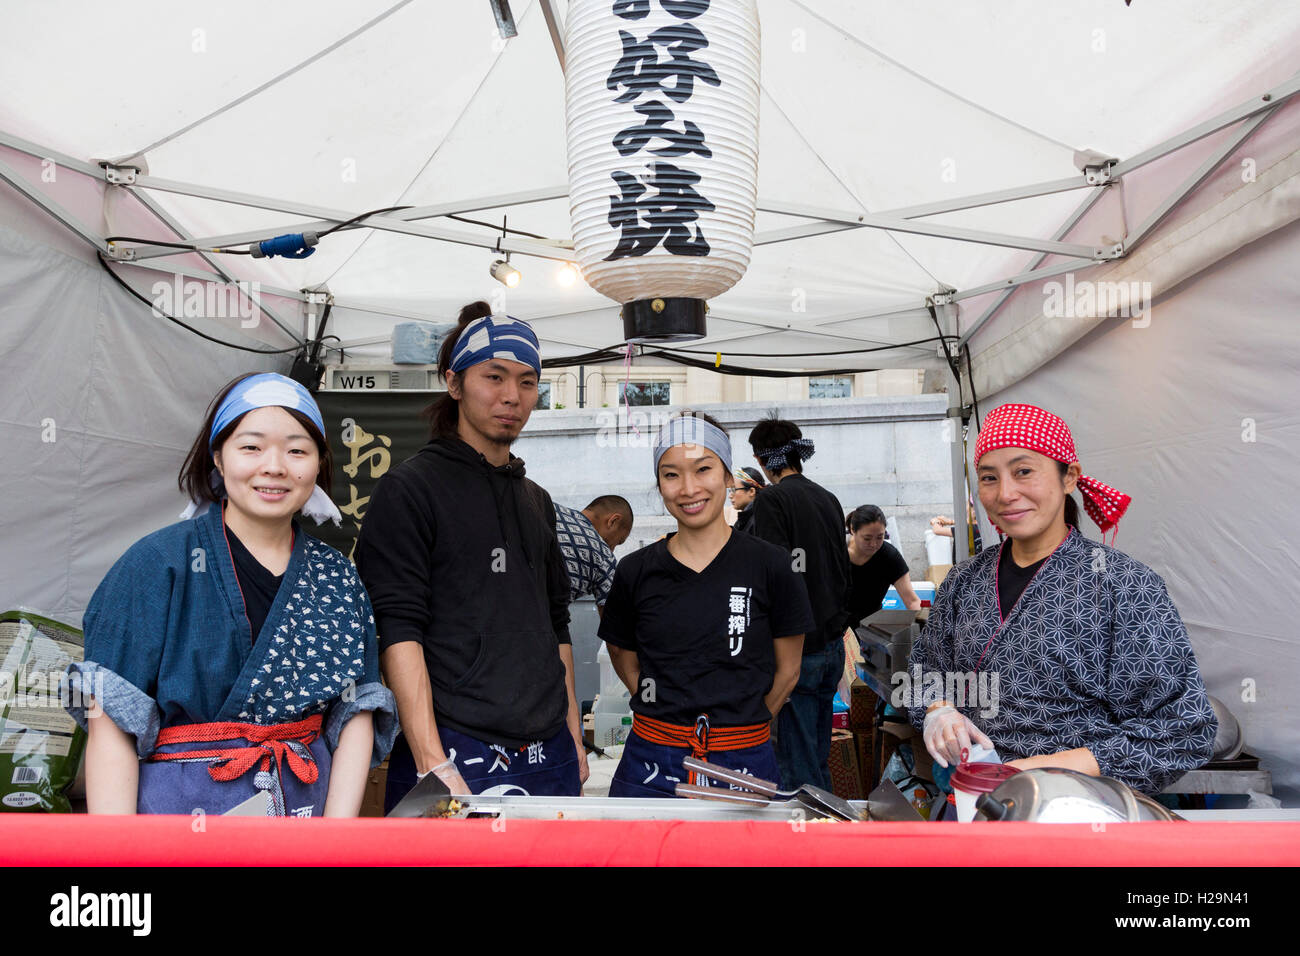 London, UK. 25 September 2016. Pictured: chefs at food stalls. London celebrates Japan Matsuri 2016. The festival, now in its 8th year, brings people together to enjoy a day of Japanese food, music, dance and culture in Trafalgar Square. Credit:  Bettina Strenske/Alamy Live News Stock Photo